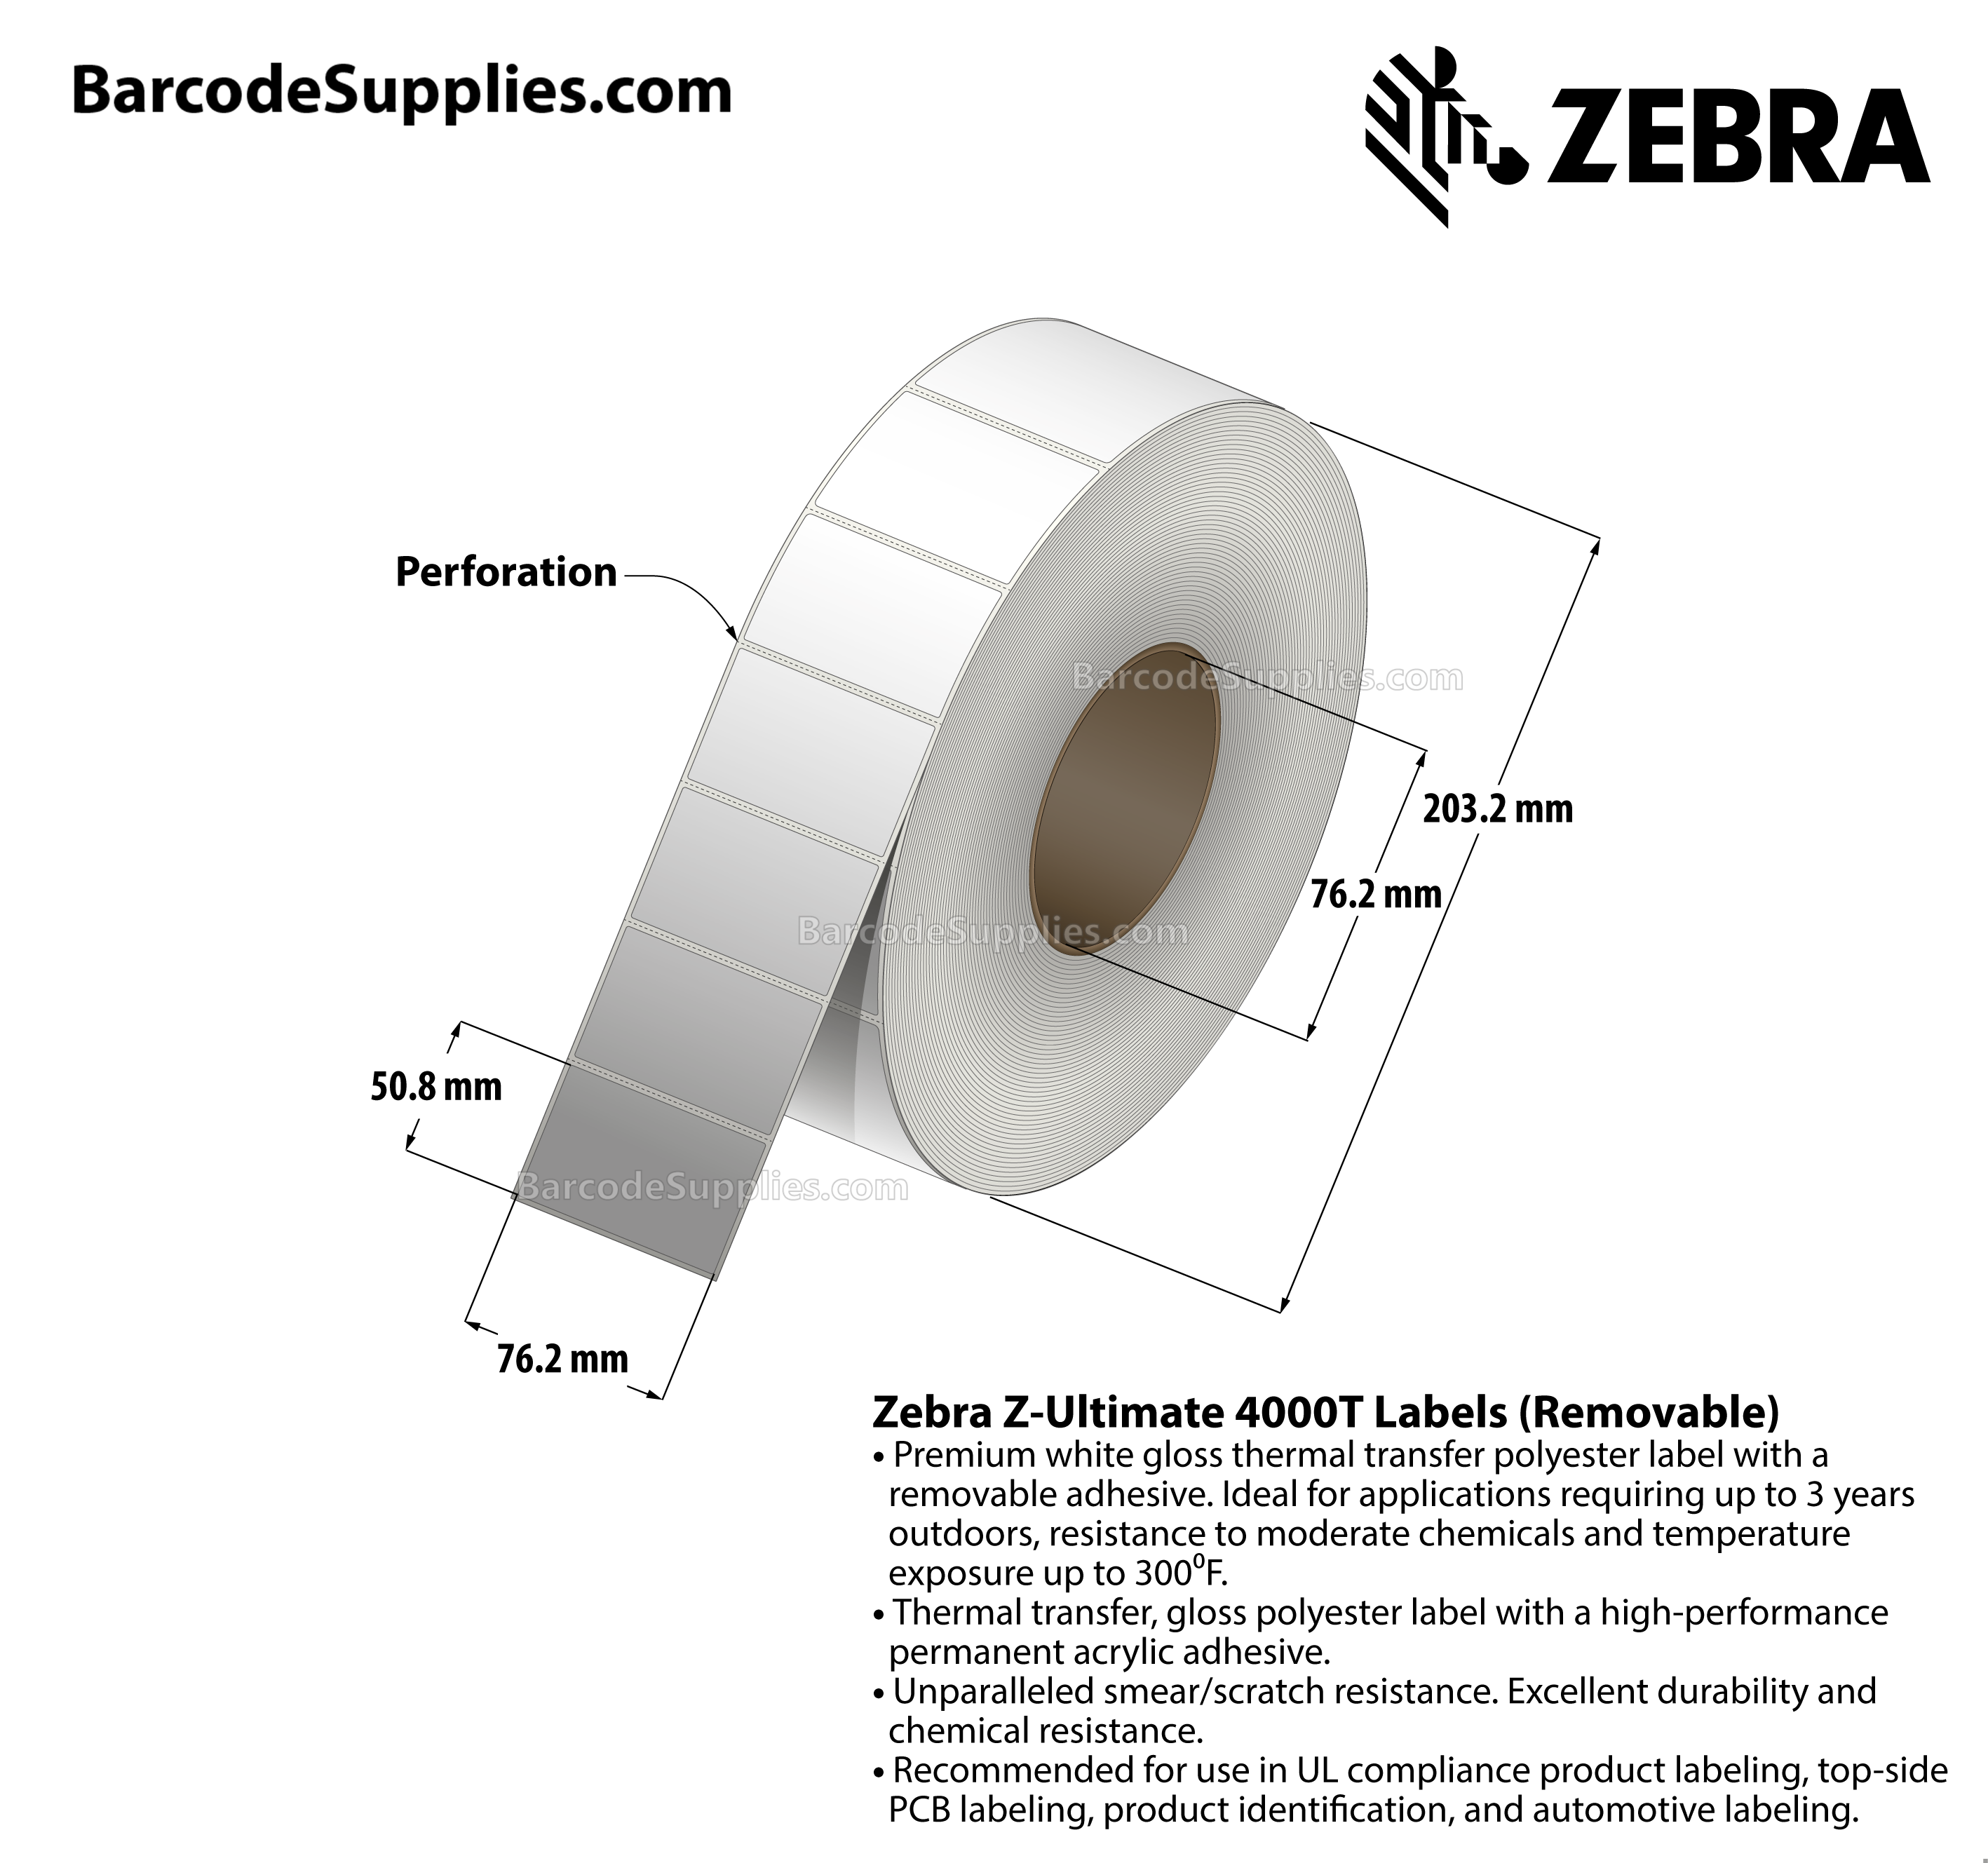 3 x 2 Thermal Transfer White Z-Ultimate 4000T Removable Labels With Removable Adhesive - Perforated - 1000 Labels Per Roll - Carton Of 1 Rolls - 1000 Labels Total - MPN: 10023151